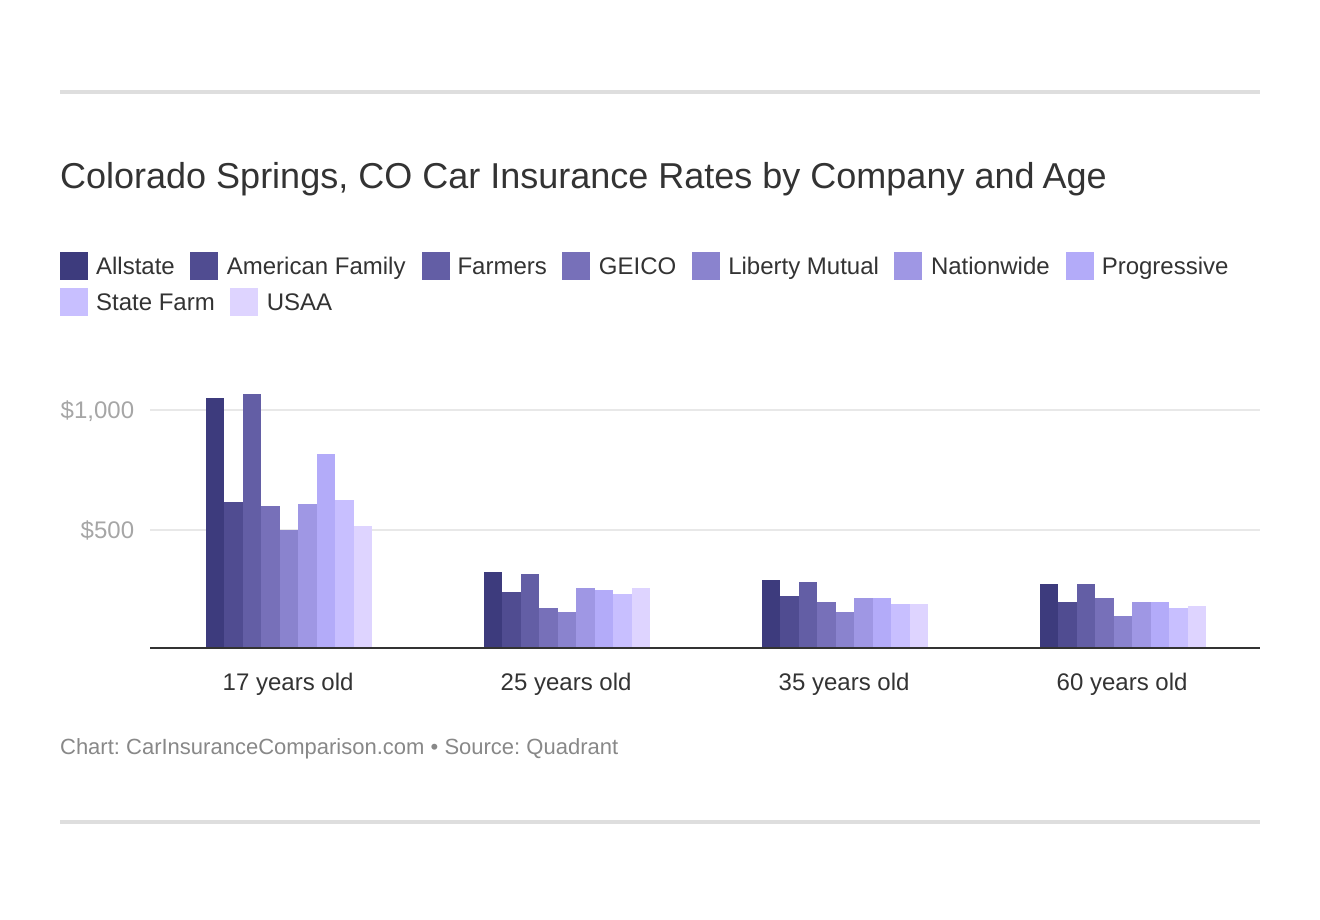 Colorado Springs, CO Car Insurance Rates by Company and Age